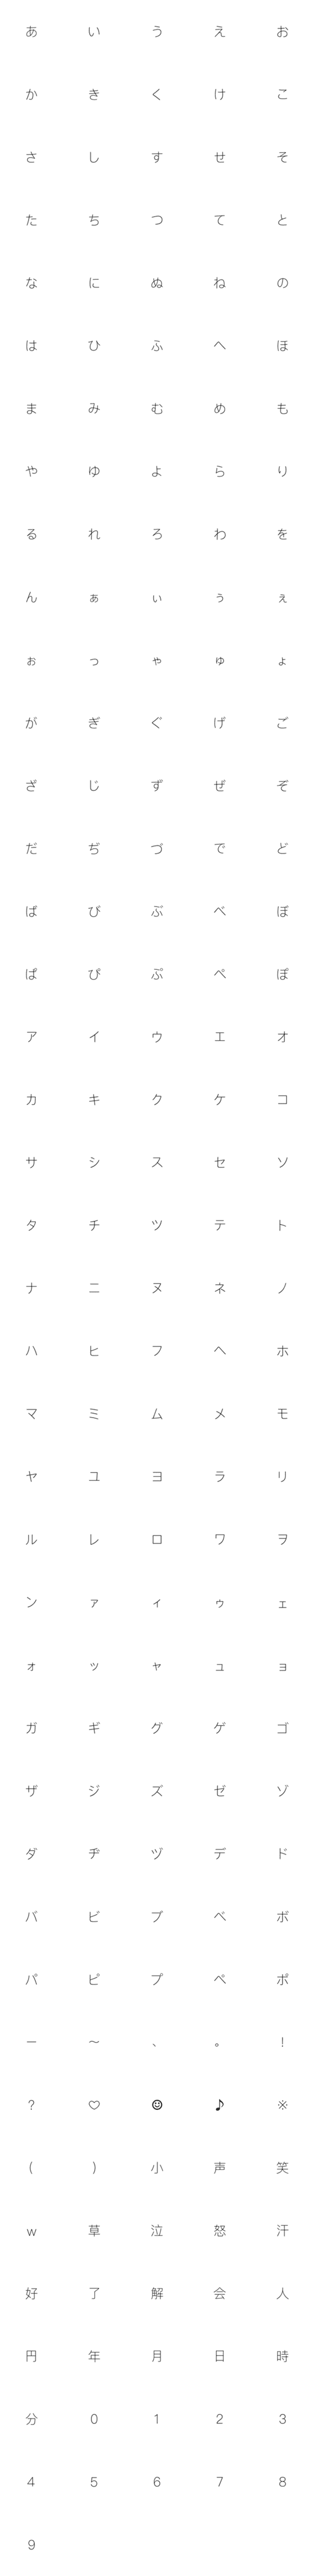 [LINE絵文字]小声文字の画像一覧